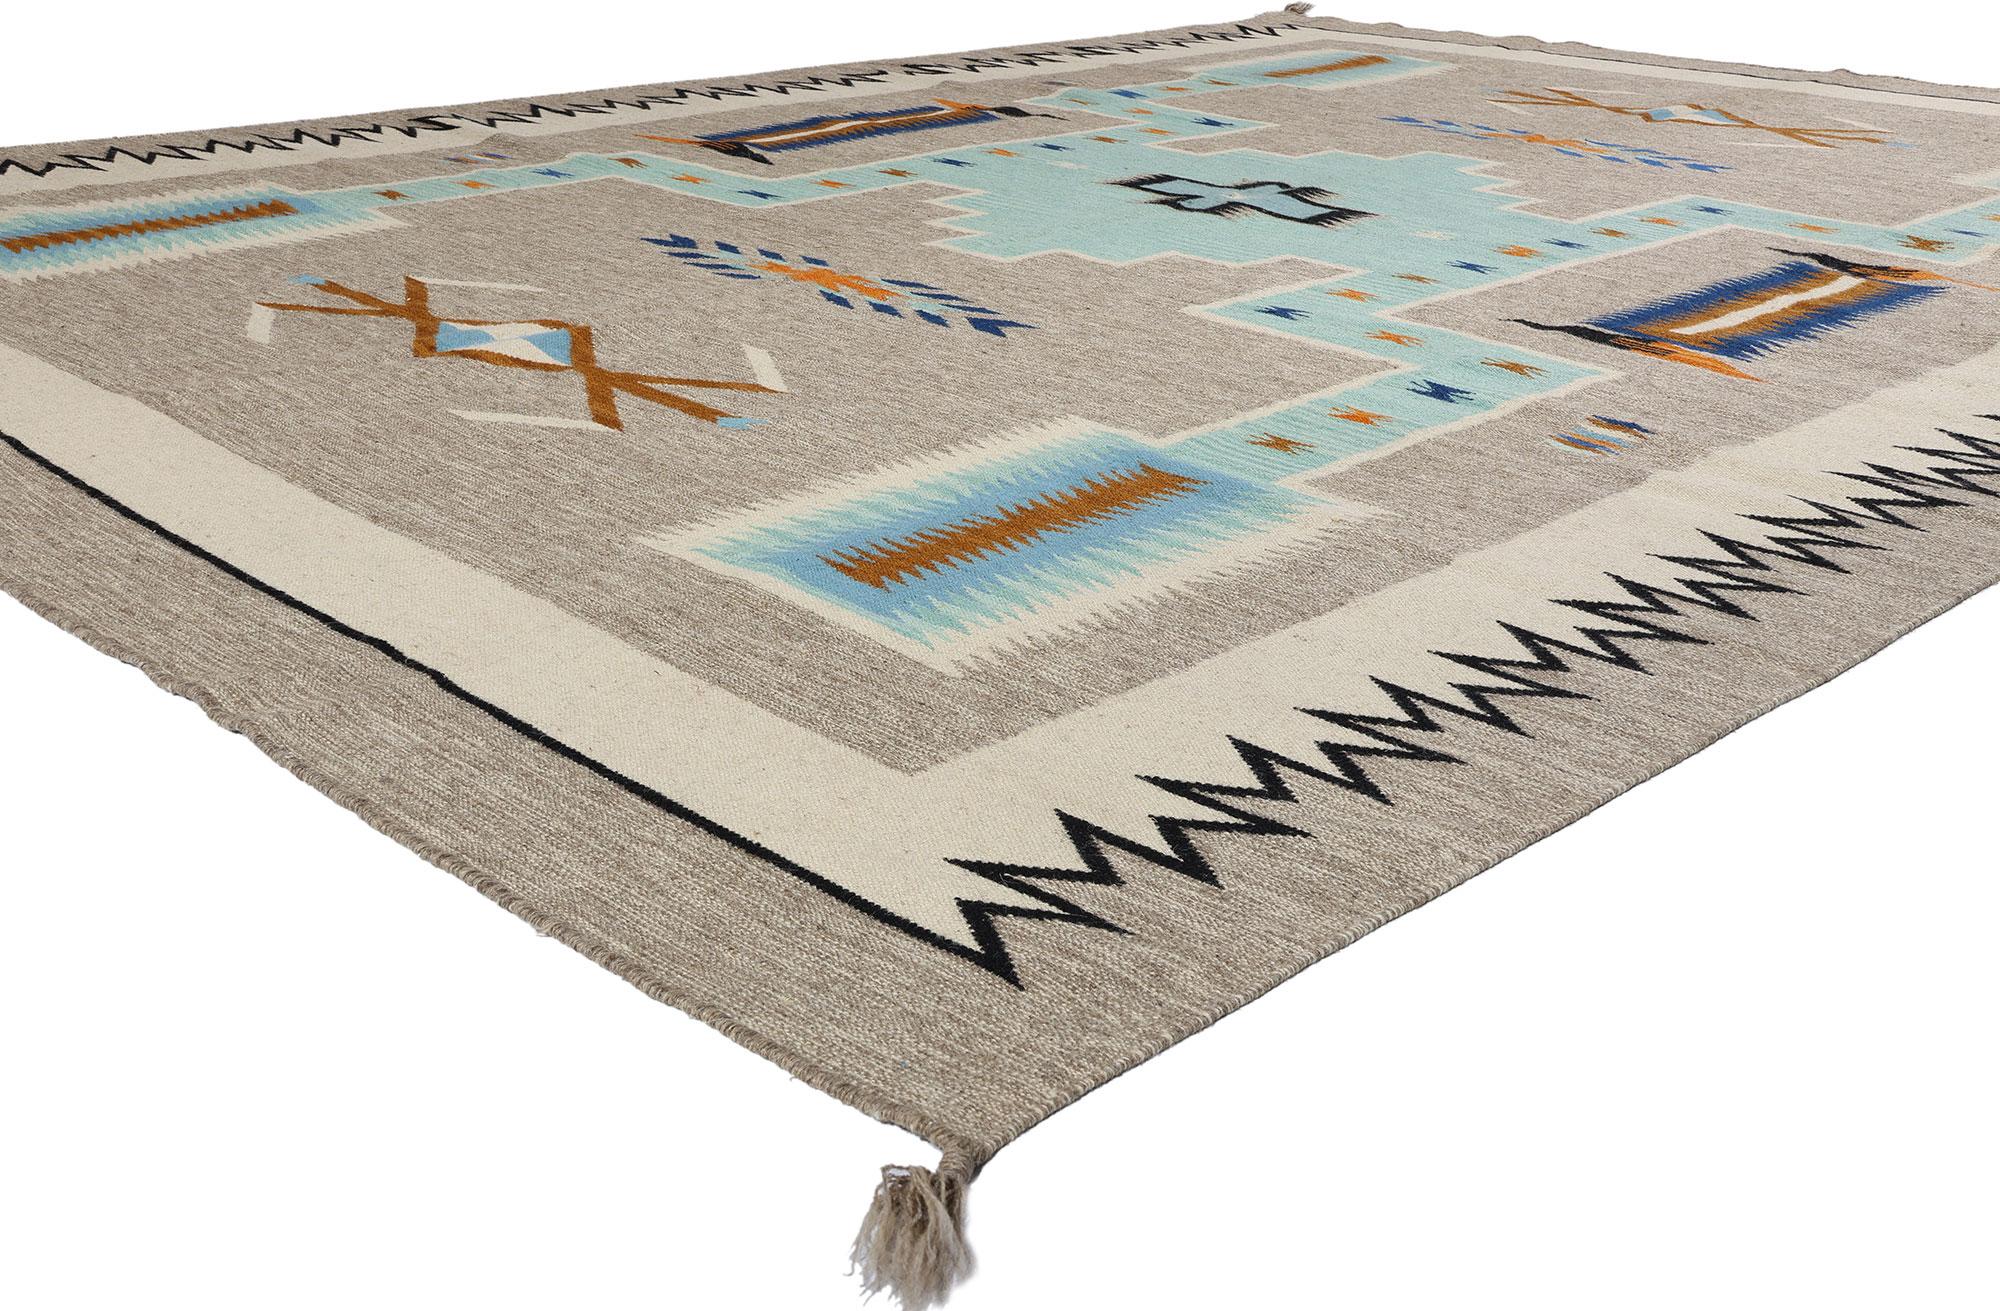 81020 Southwestern Navajo Style Rug with Storm Pattern, 08'11 x 12'00. Explore the captivating fusion of Santa Fe and Southwestern styles within this meticulously handwoven Navajo-inspired rug, showcasing the timeless Storm Pattern—an iconic design